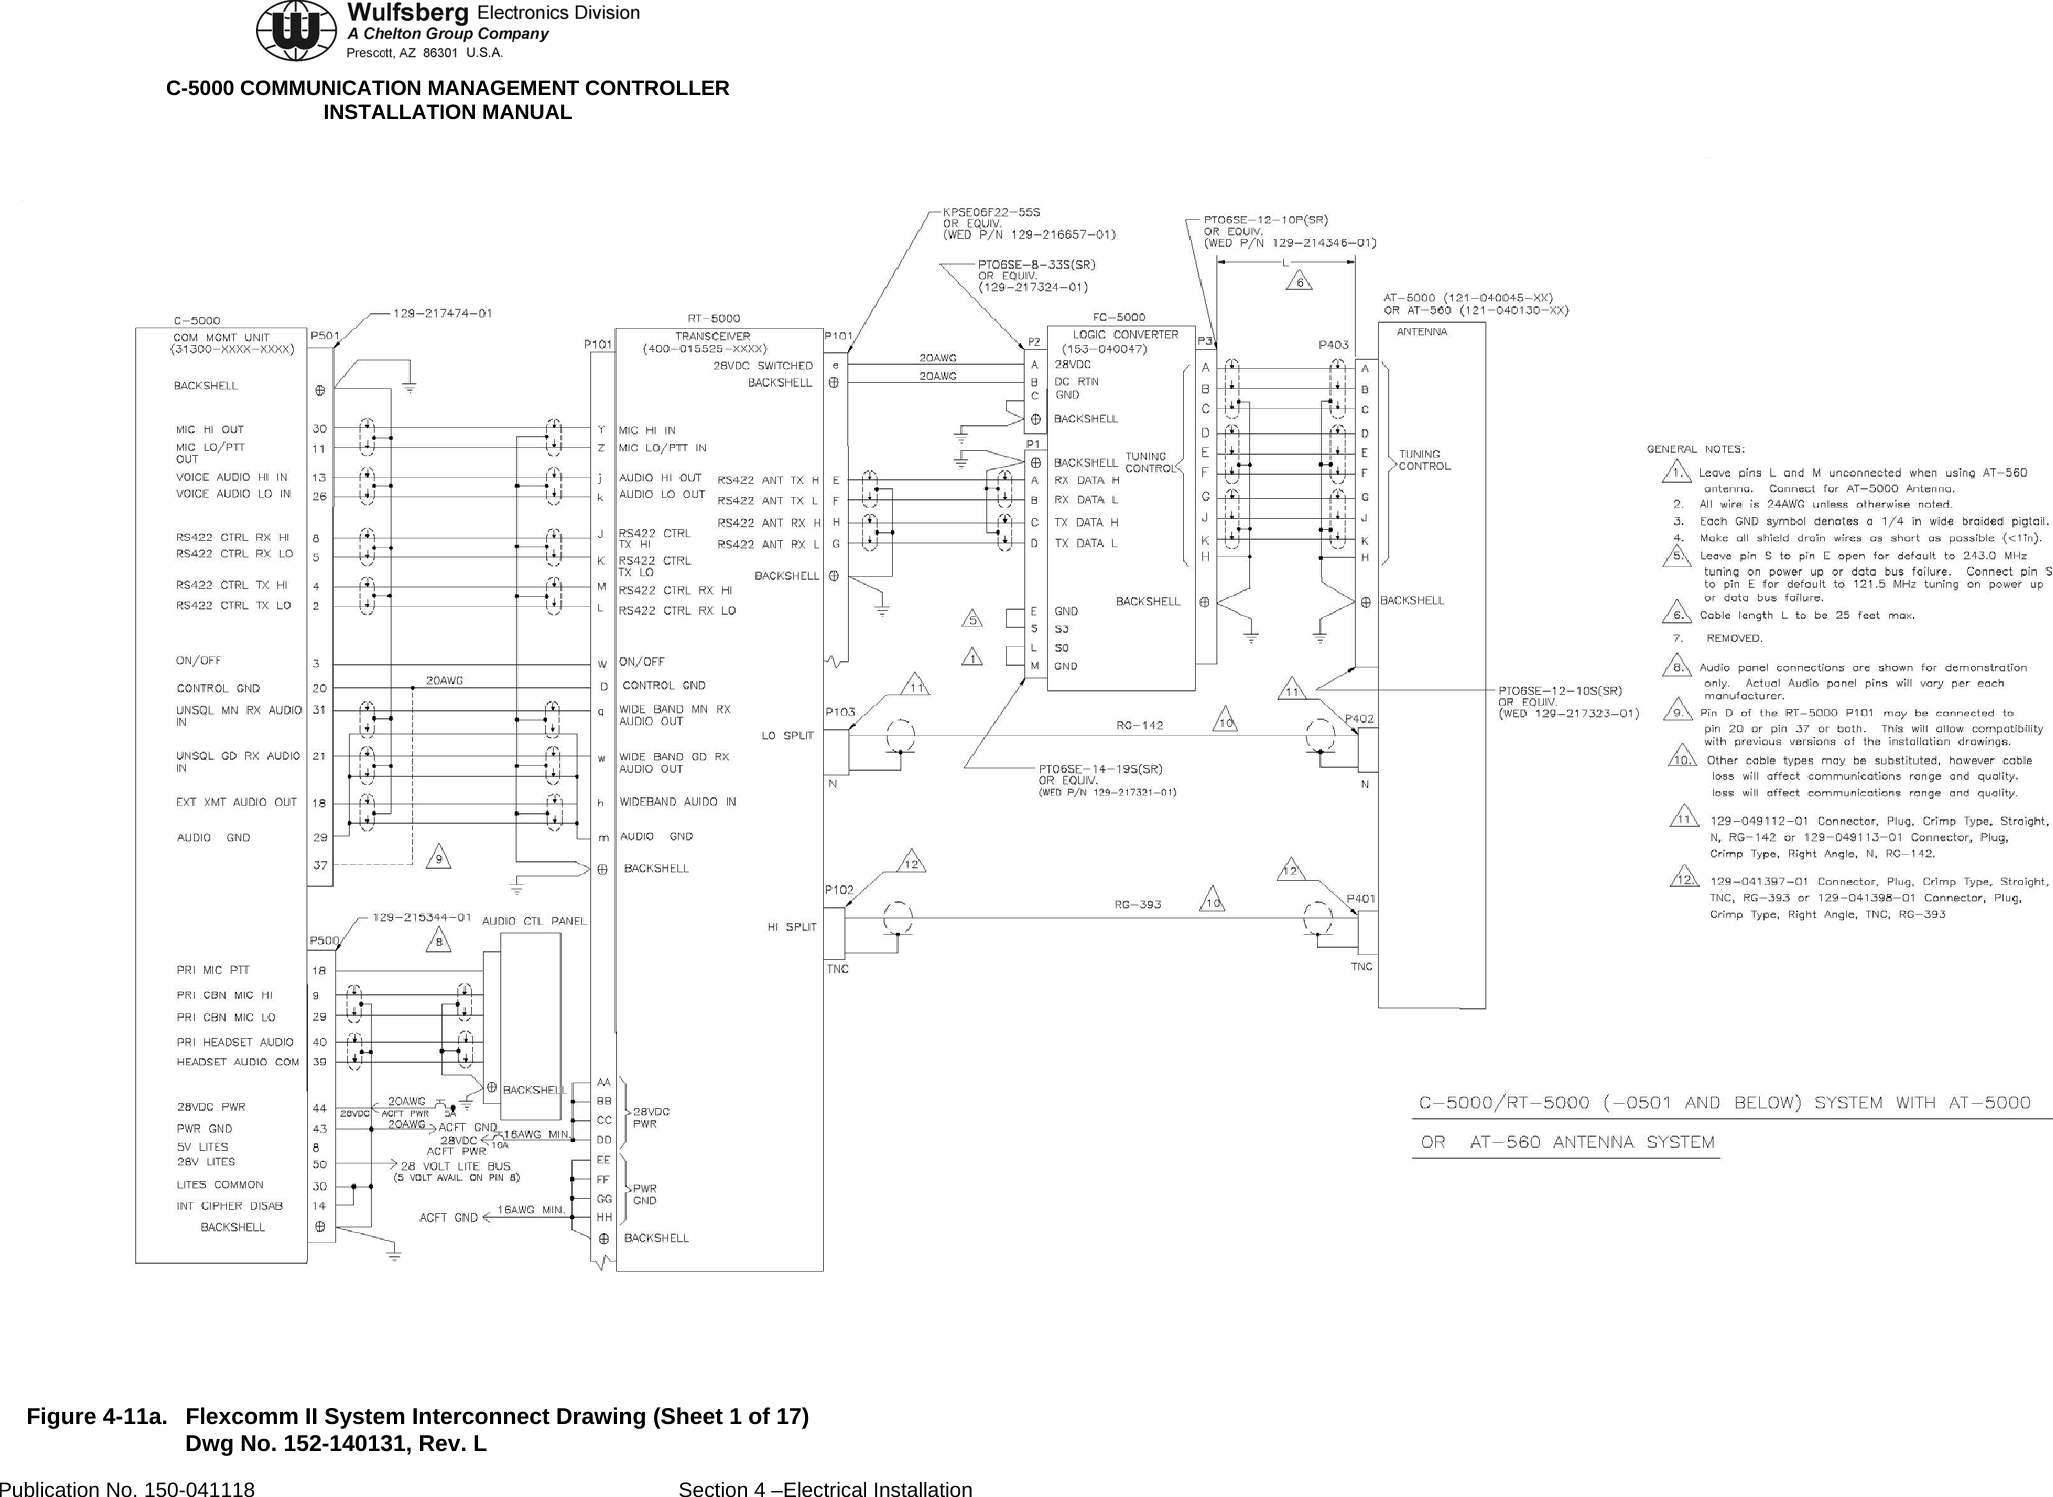  C-5000 COMMUNICATION MANAGEMENT CONTROLLER INSTALLATION MANUAL  Figure 4-11a.  Flexcomm II System Interconnect Drawing (Sheet 1 of 17) Dwg No. 152-140131, Rev. L Publication No. 150-041118  Section 4 –Electrical Installation 